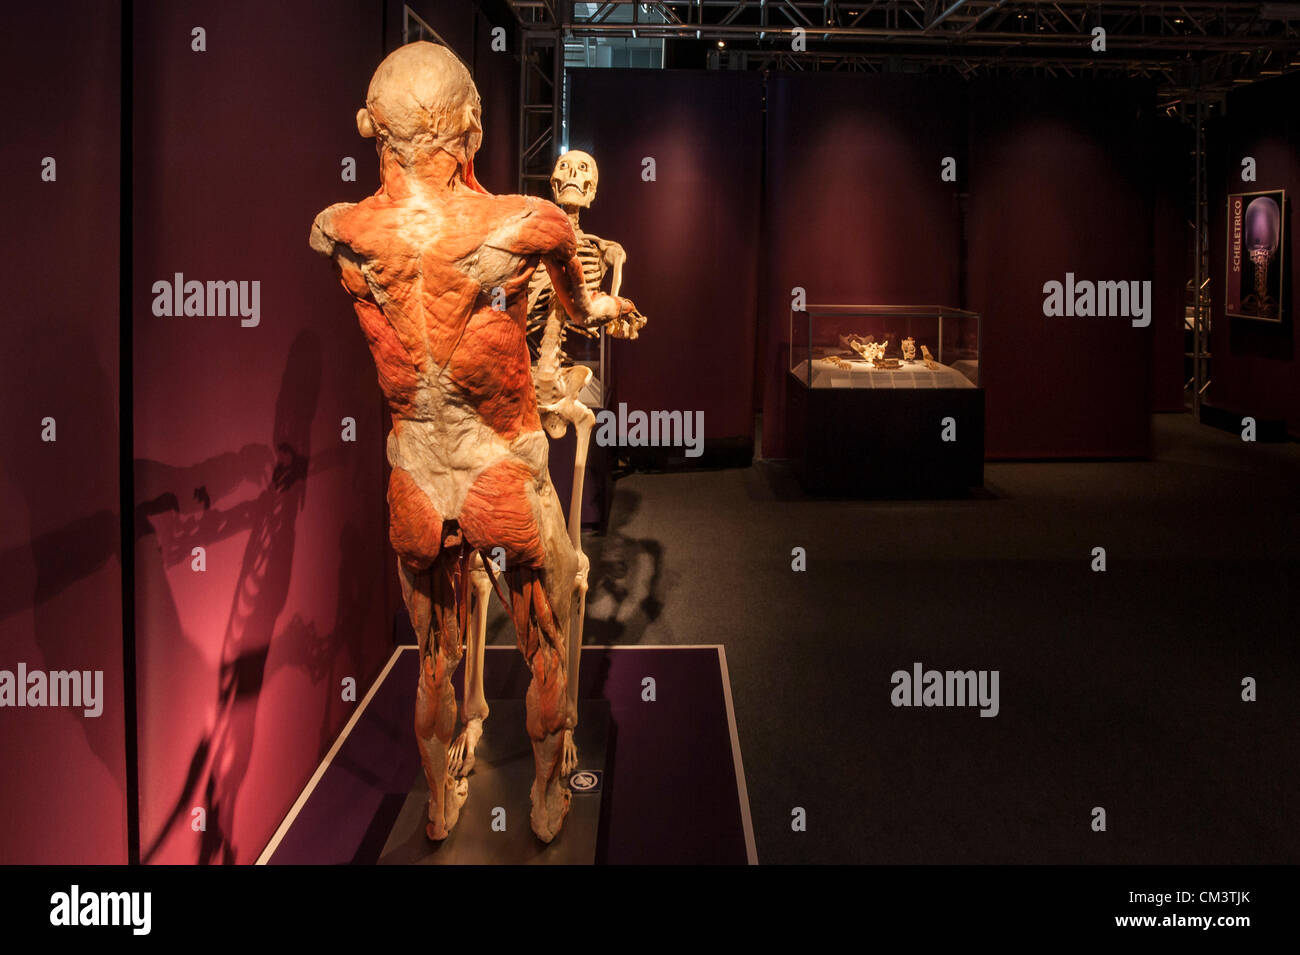 Italy Torino Palaisozaki the exhibition The Human Body Exhibition September 28, 2012 at 12 Am .The exhibition opens to the public on 29 September  2012 and ending January 13, 2013.The bodies in the exhibition are human died of natural causes and treated with a special method called plastination. The visitors, thanks to this method of conservation can view all body organs, bones and muscles and all the inside of the body in every detail Stock Photo